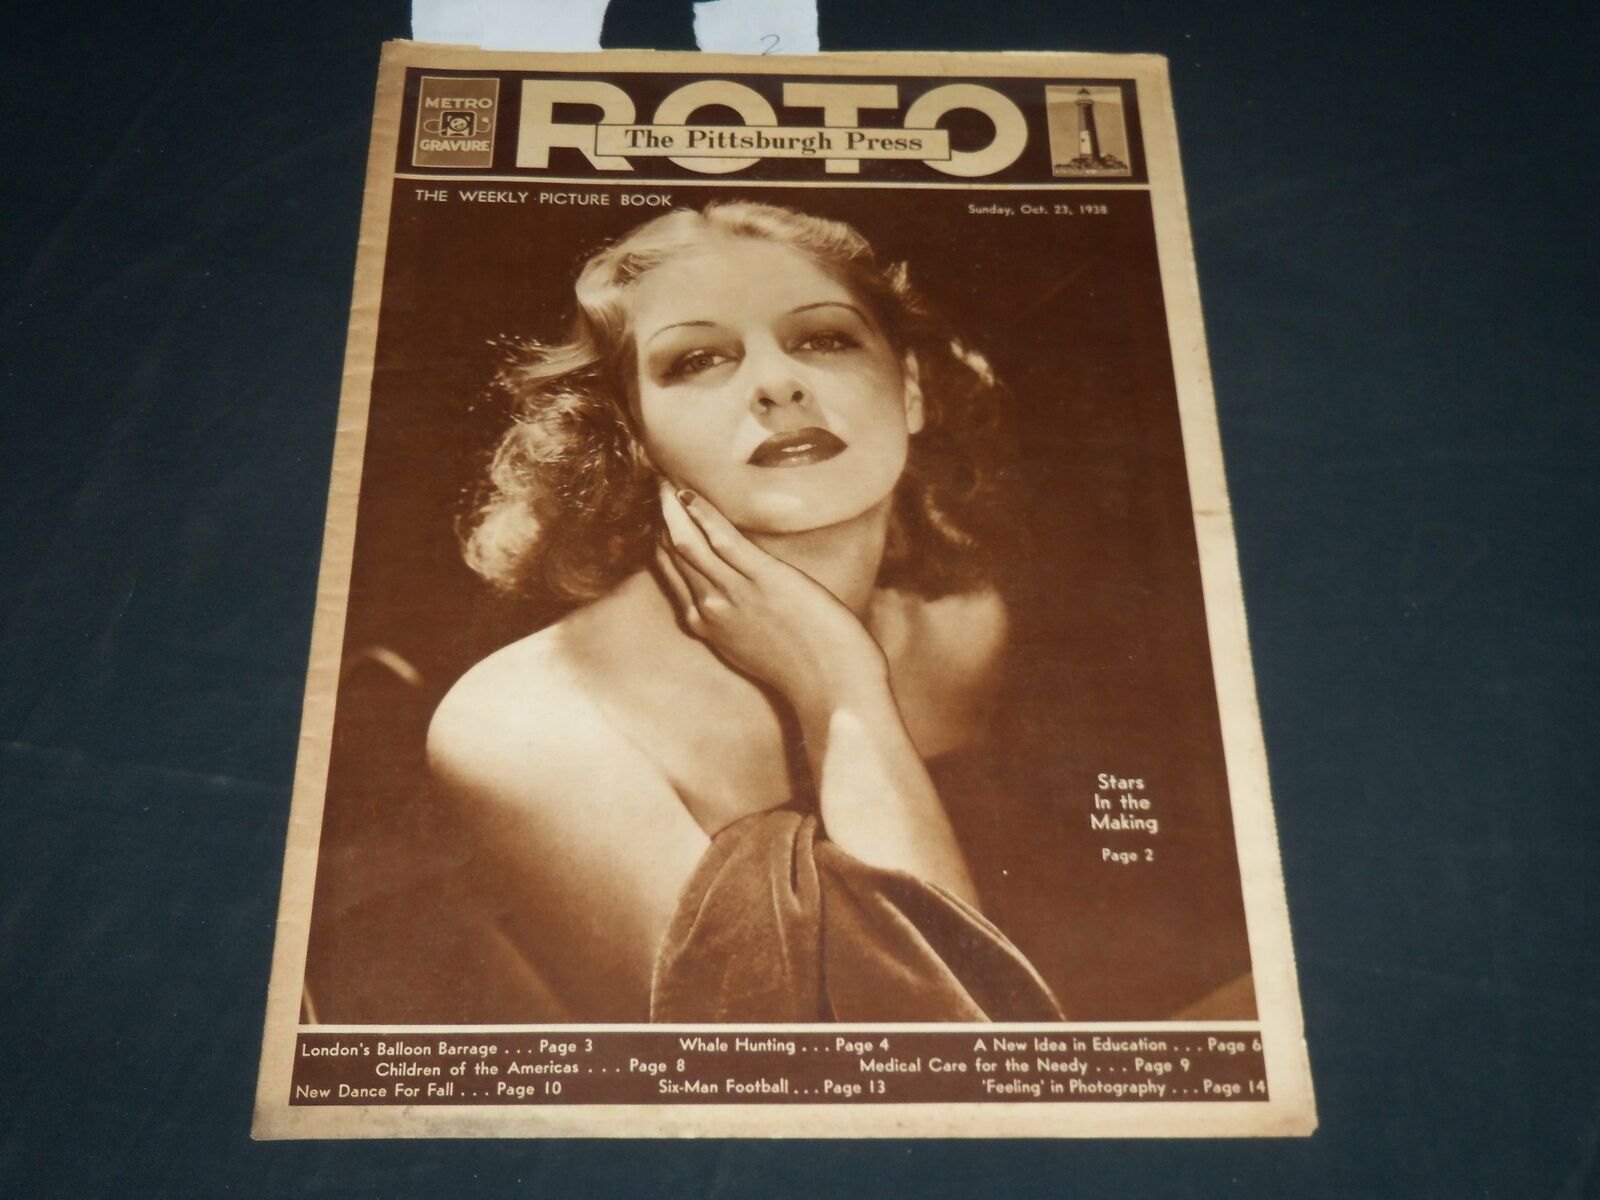 1938 OCT 23 THE PITTSBURGH PRESS SUNDAY ROTO SECTION - ANNA NEAGLE - NP 4554